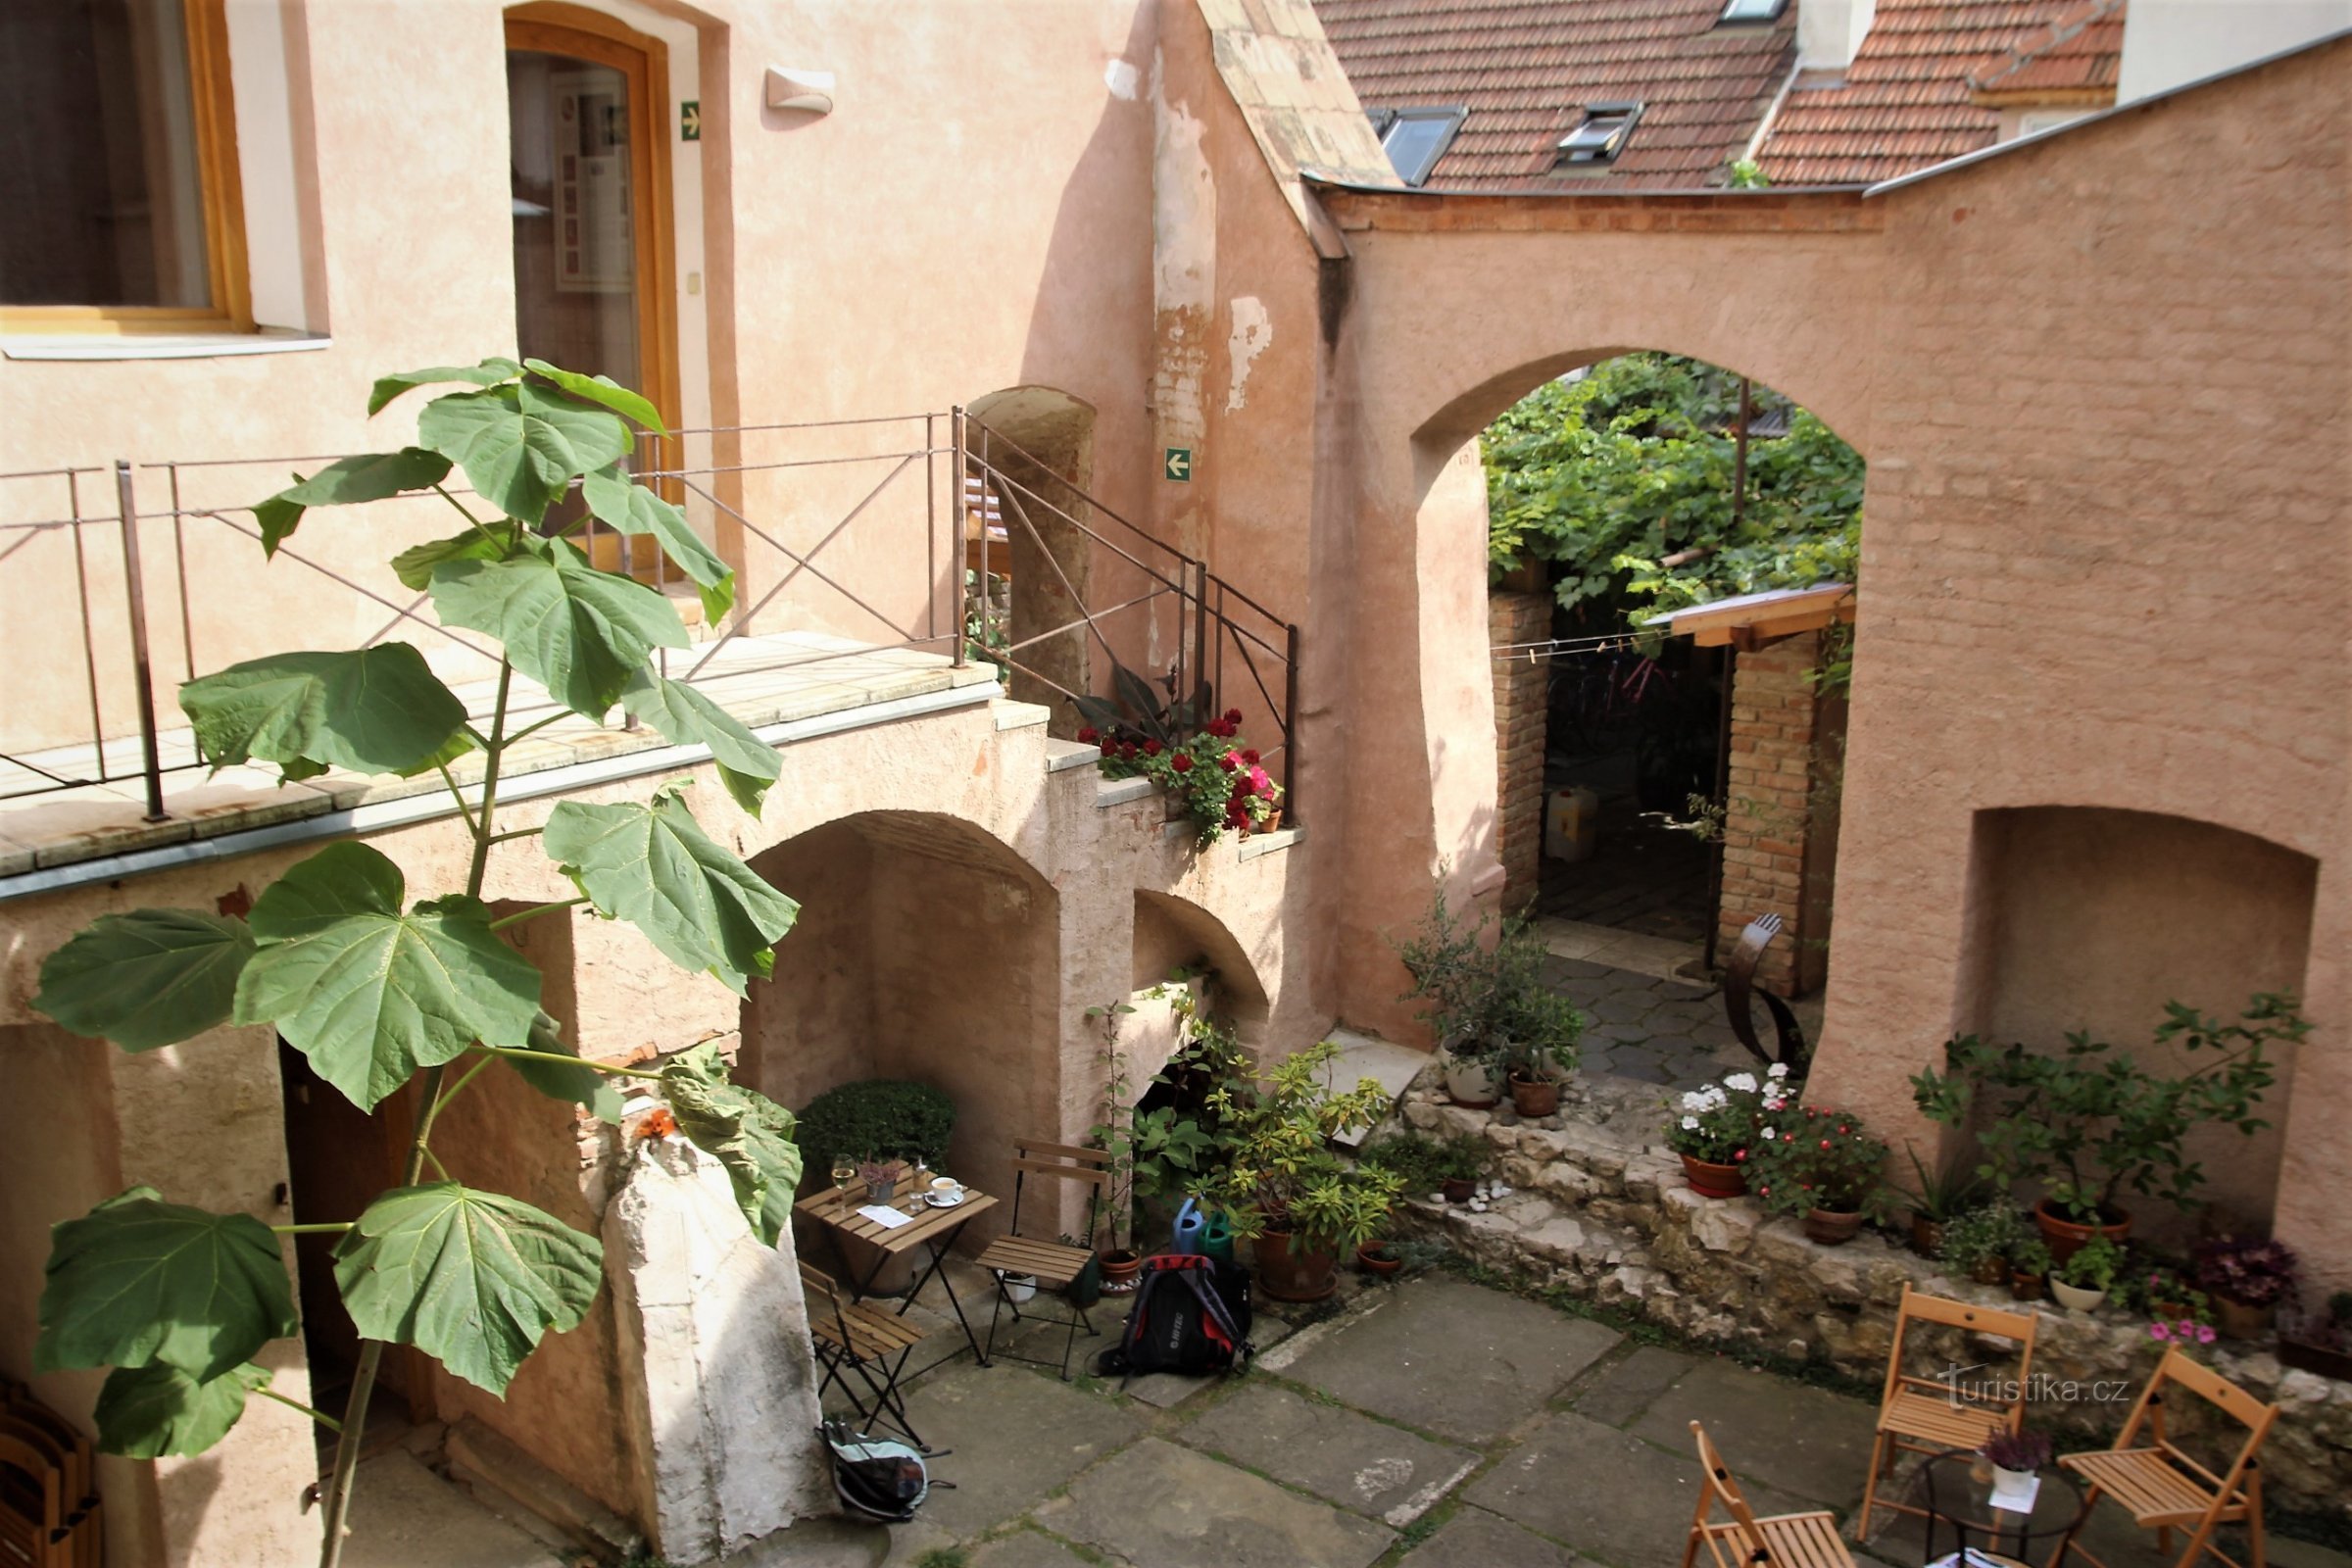 The courtyard in front of the church